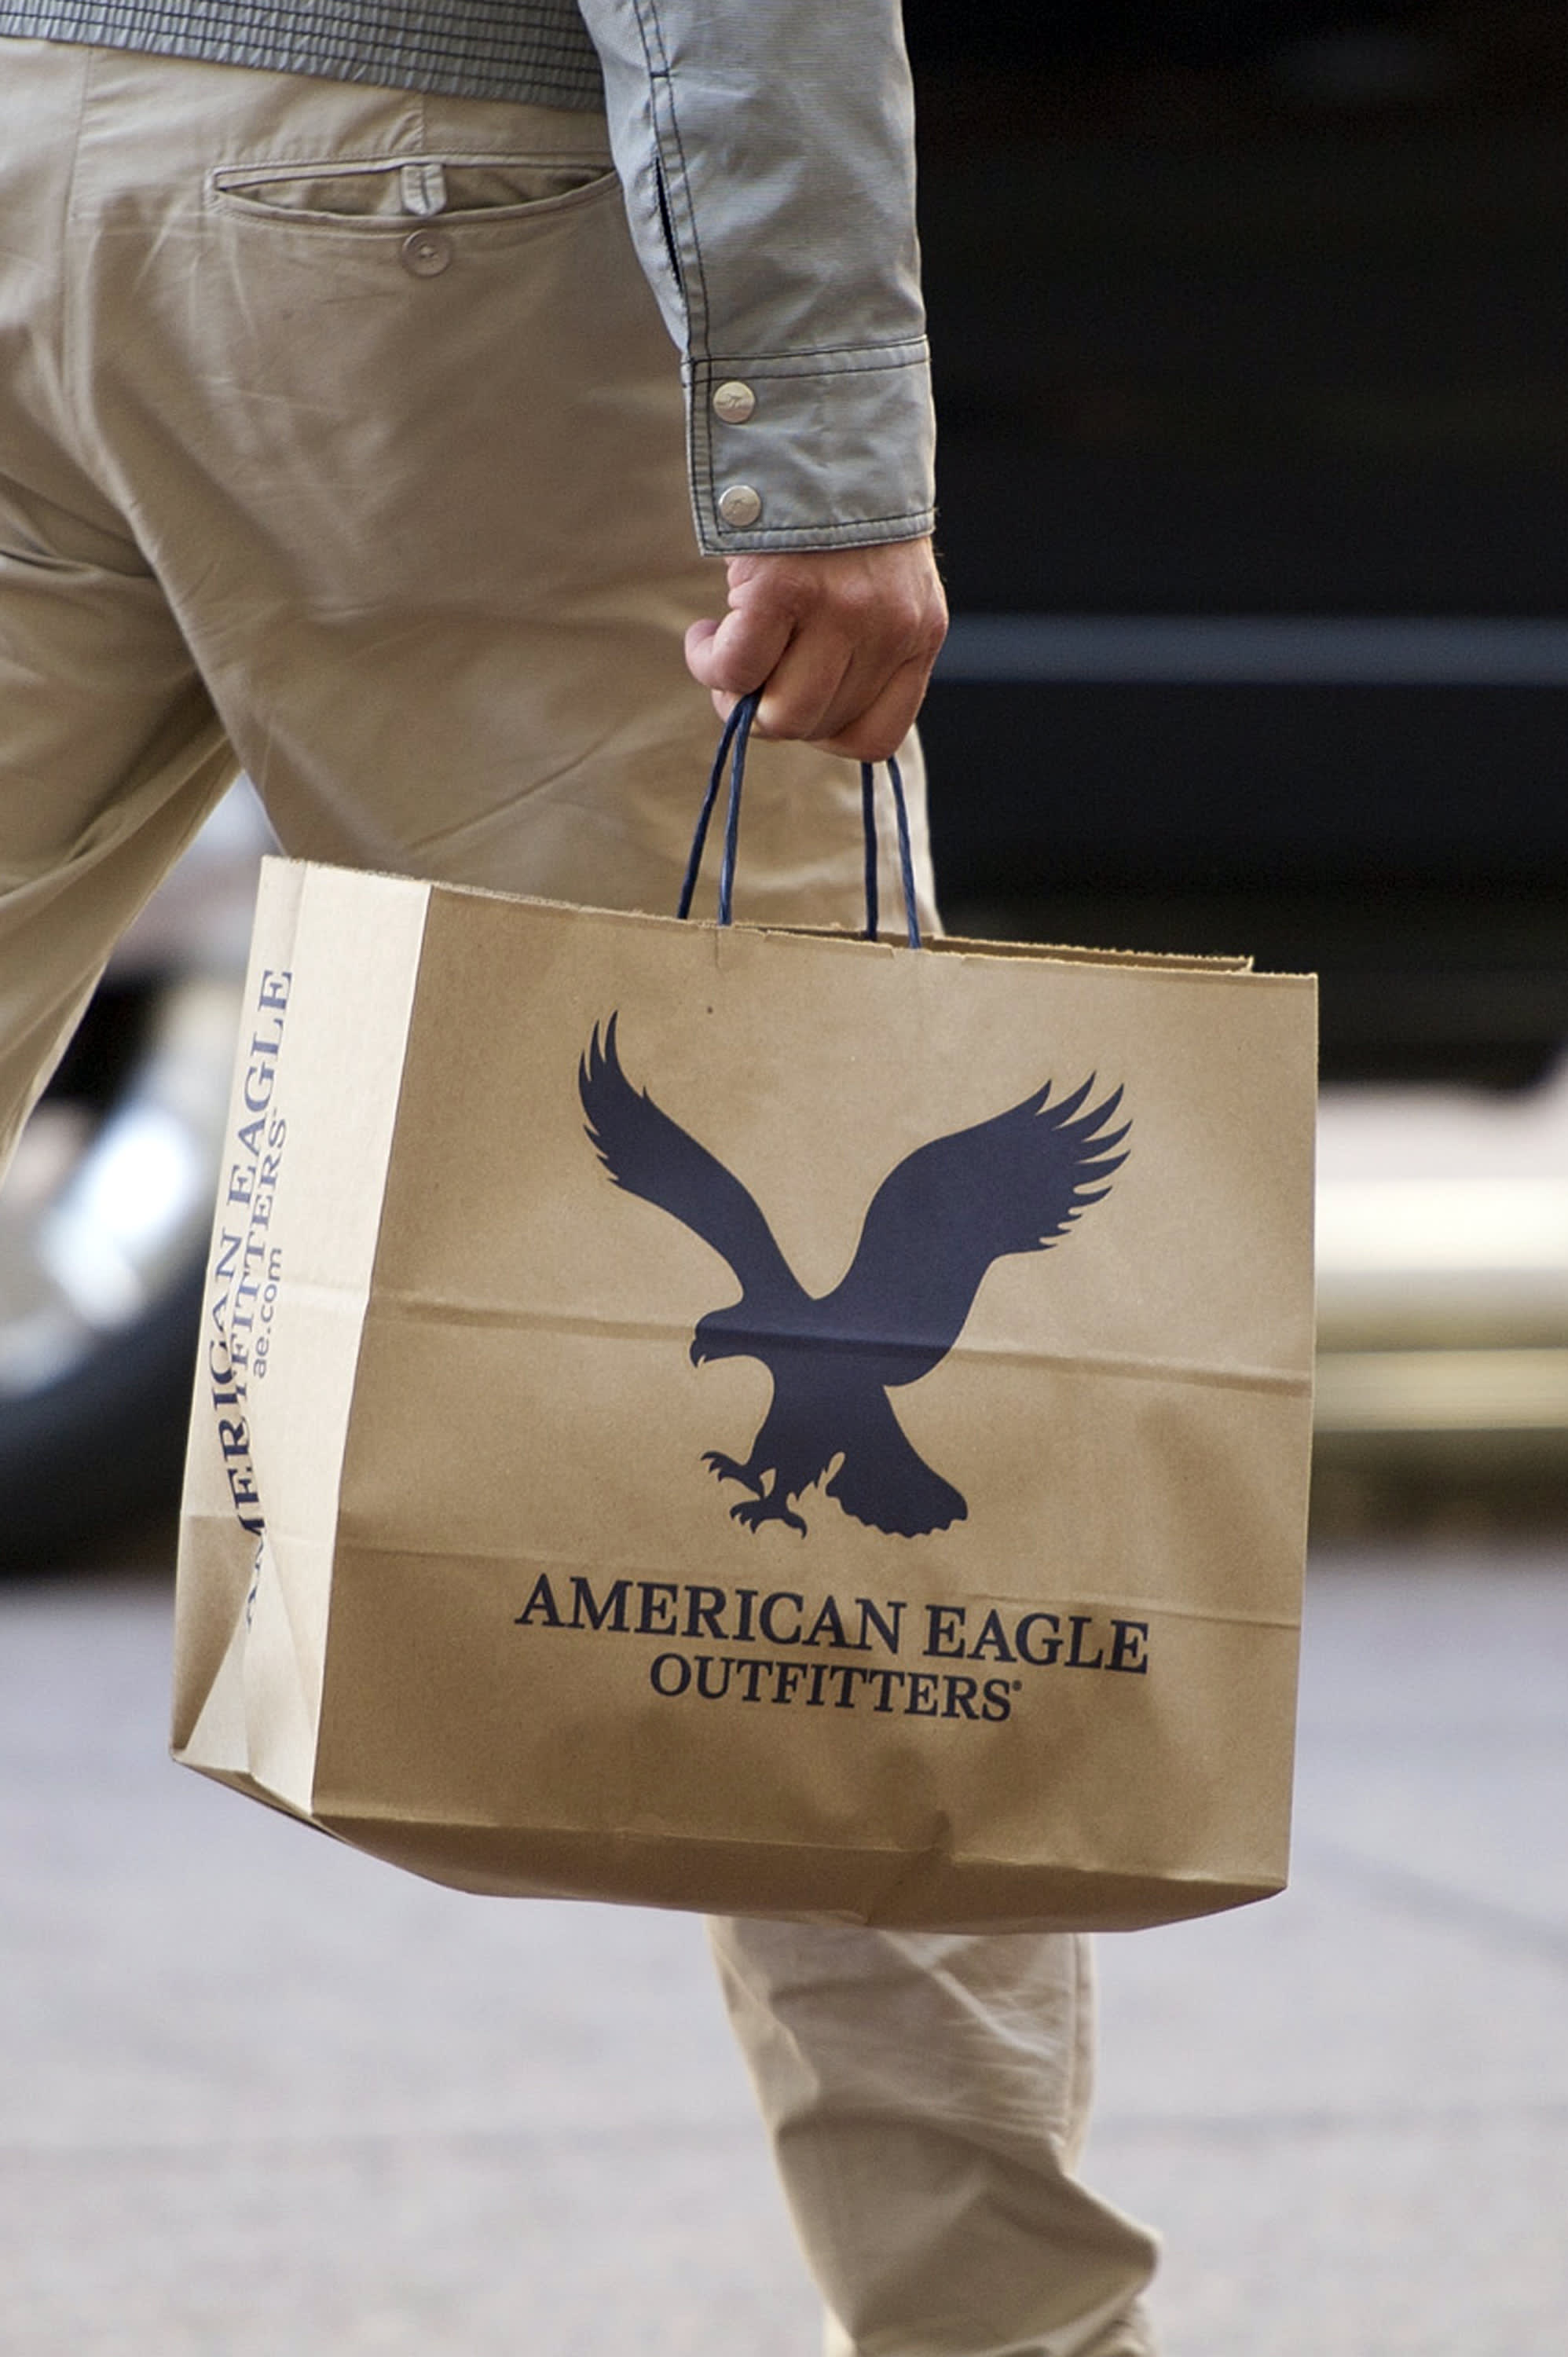 US CEO Eagle Outfitters sees post-pandemic boom similar to ’20s’